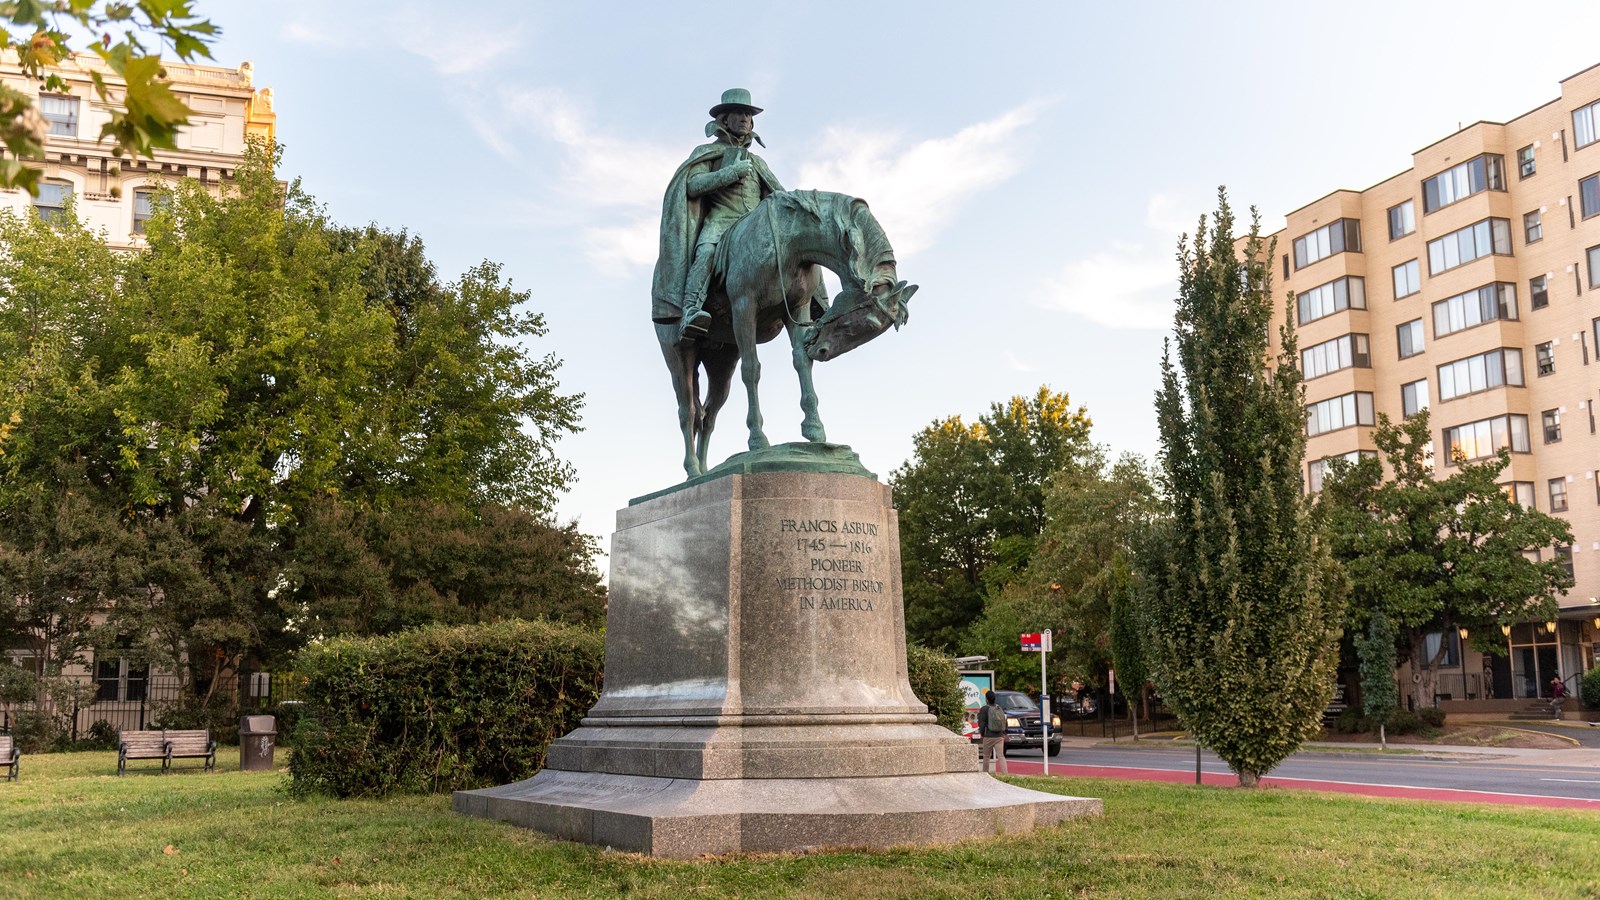 A large statue of a soldier on a horse in a city.